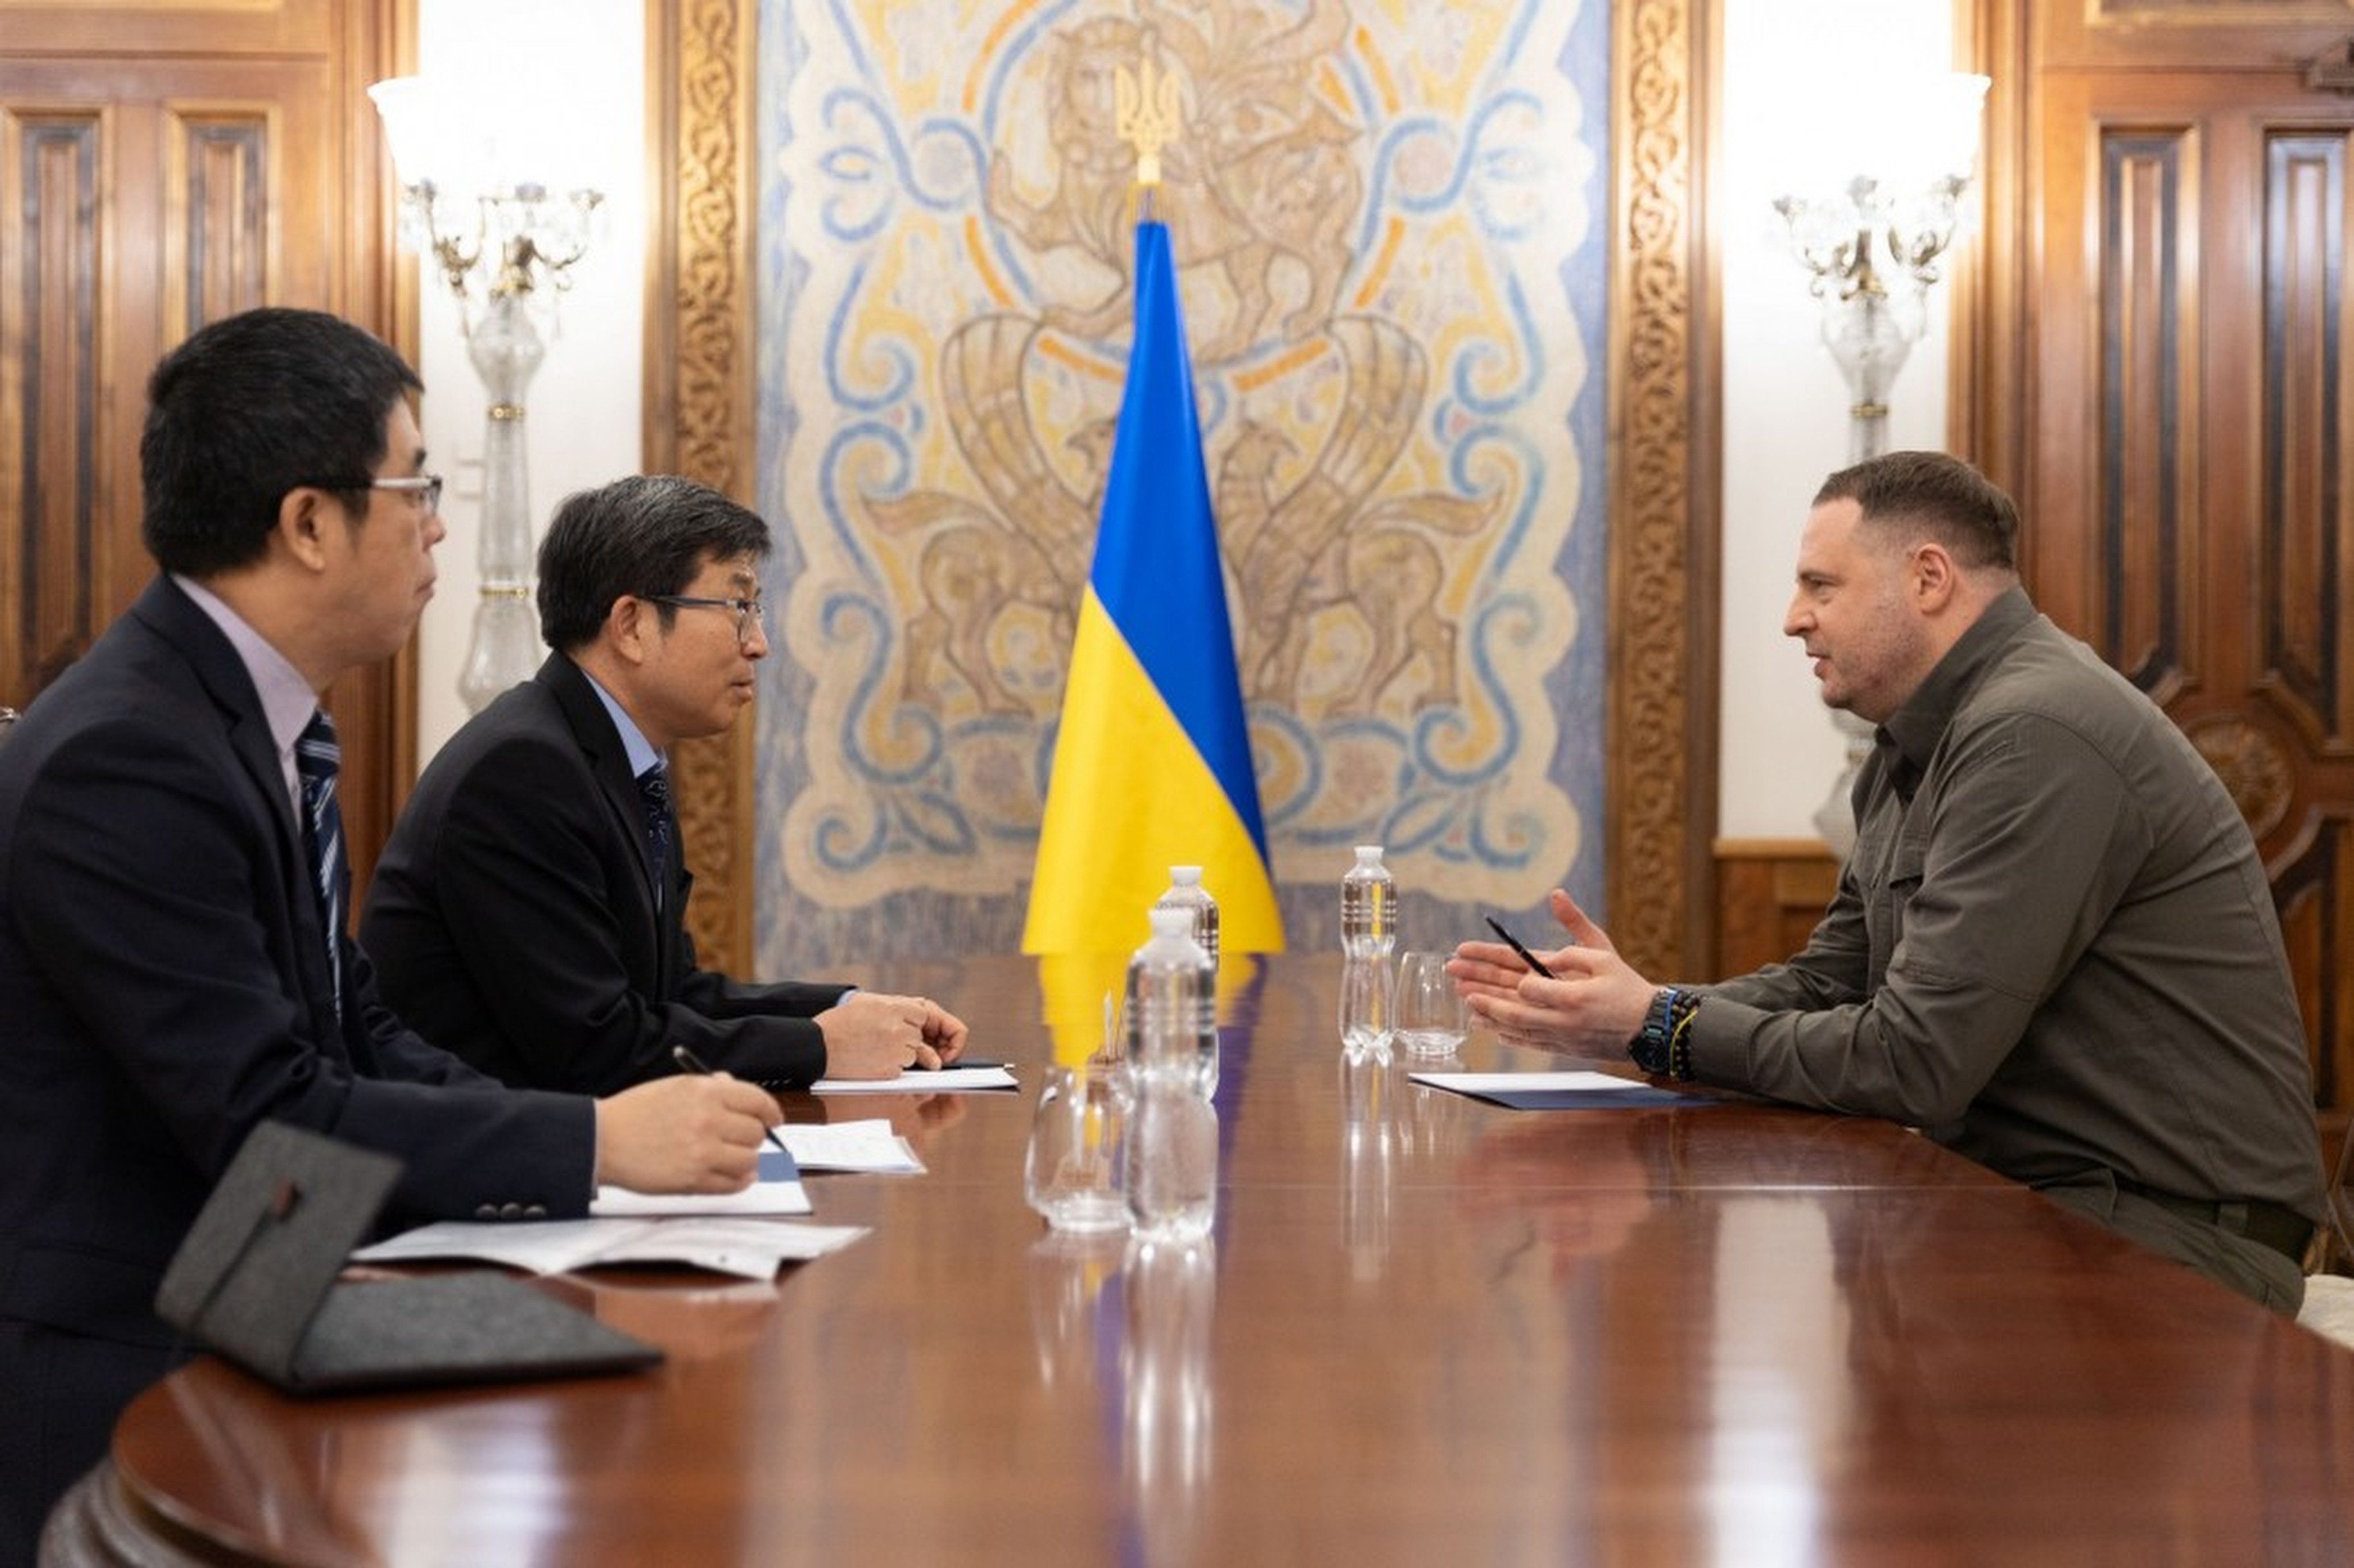 Andriy Yermak, head of Volodymyr Zelensky’s presidential office, meeting with Chinese ambassador Fan Xianrong and discussing preparations for an international leaders’ conference to be held in Switzerland, the office said in a statement. Photo: Ukraine Presidential Office